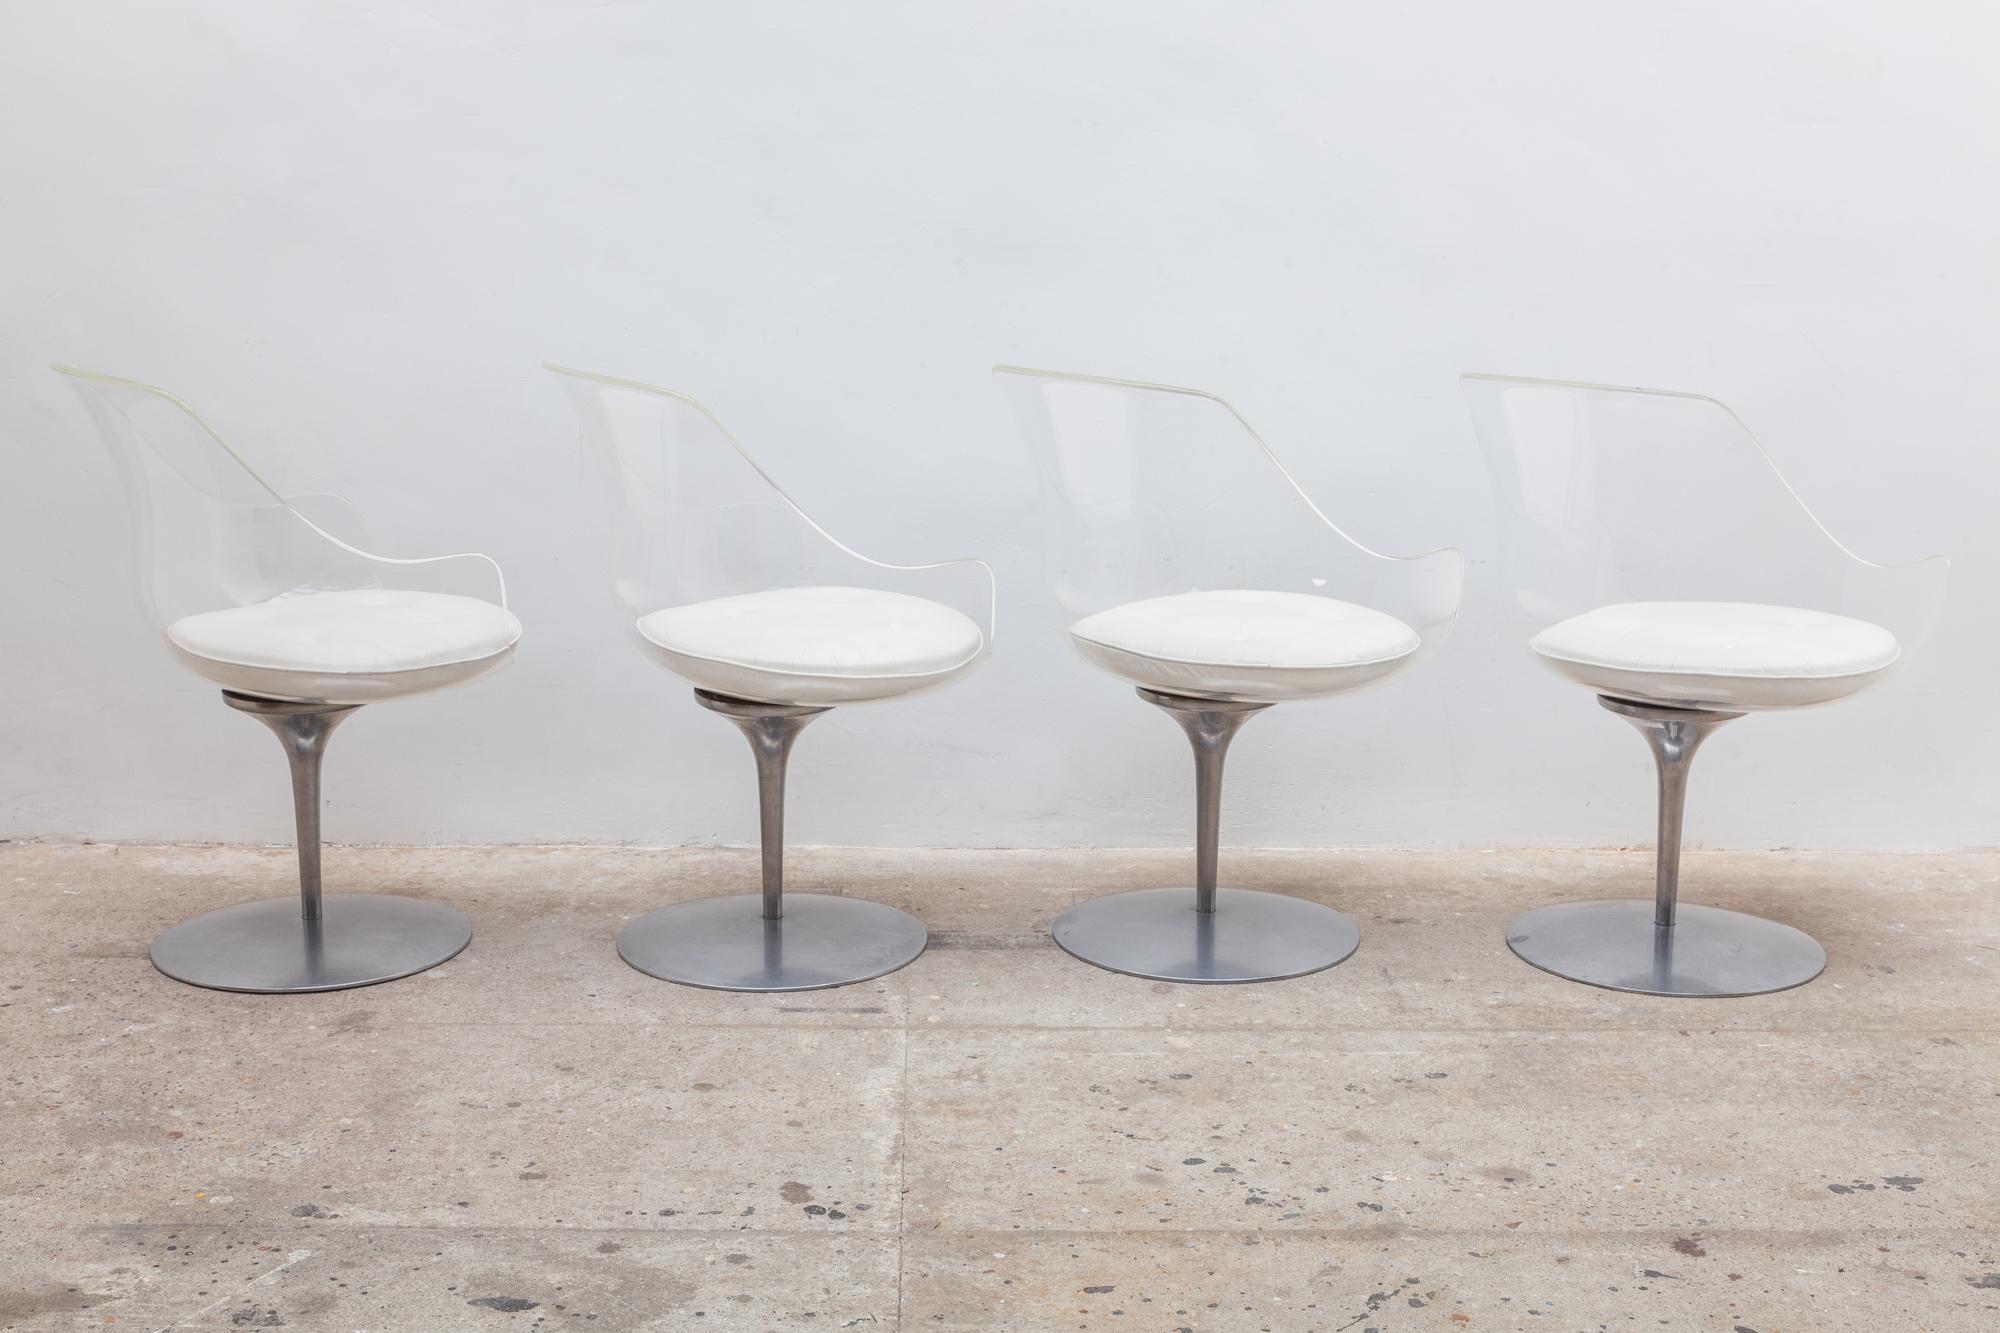 Mid-20th Century Set of Four Translucent Lucite Chairs designed by Estelle & Erwine Laverne